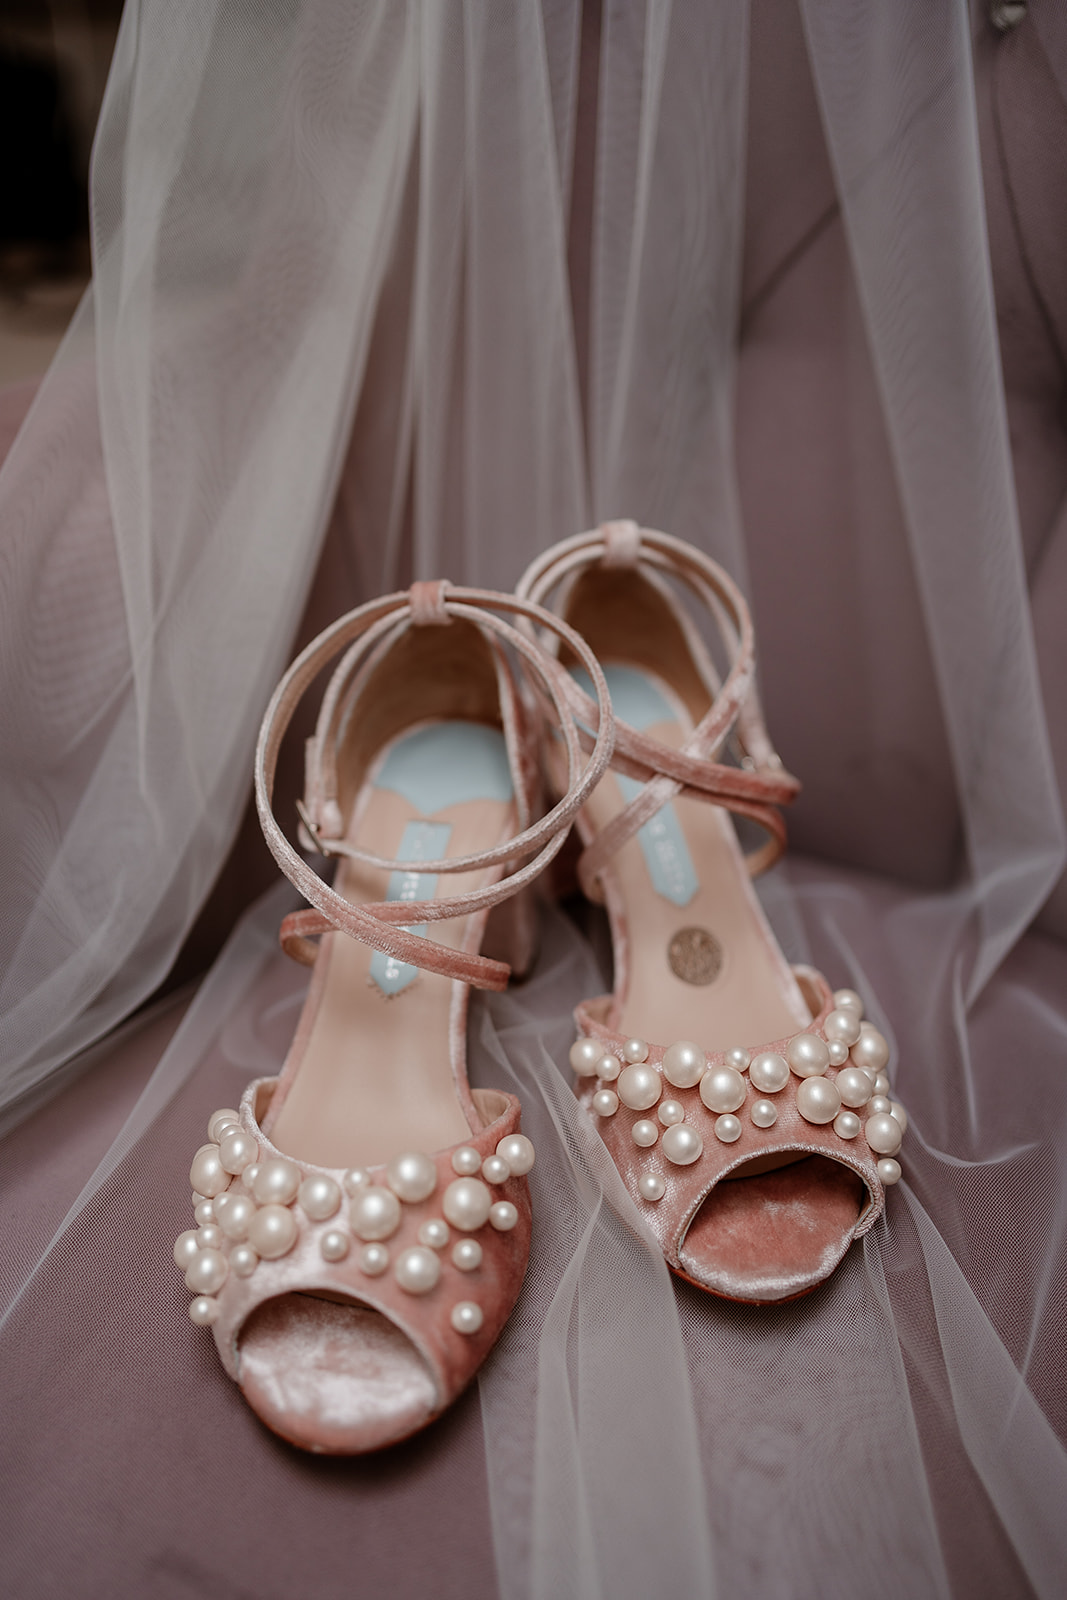 Charlotte Mills pearl shoes at a summer Syrencot wedding